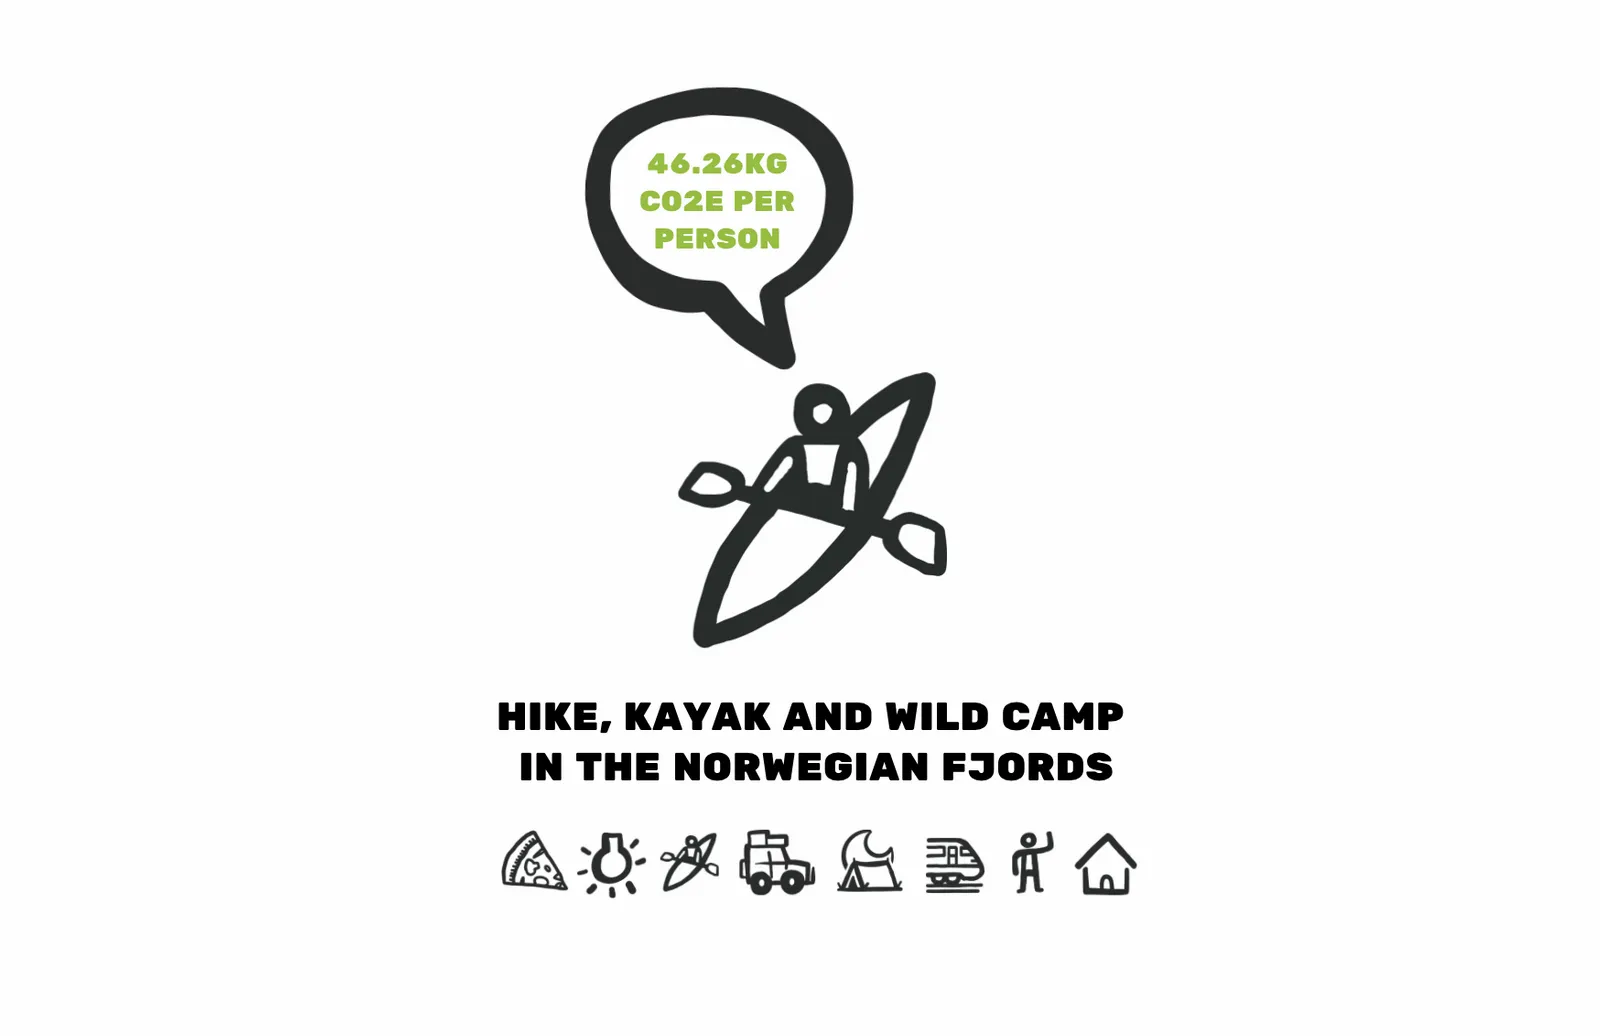 Hike, kayak and wild camp in the Norwegian fjords.